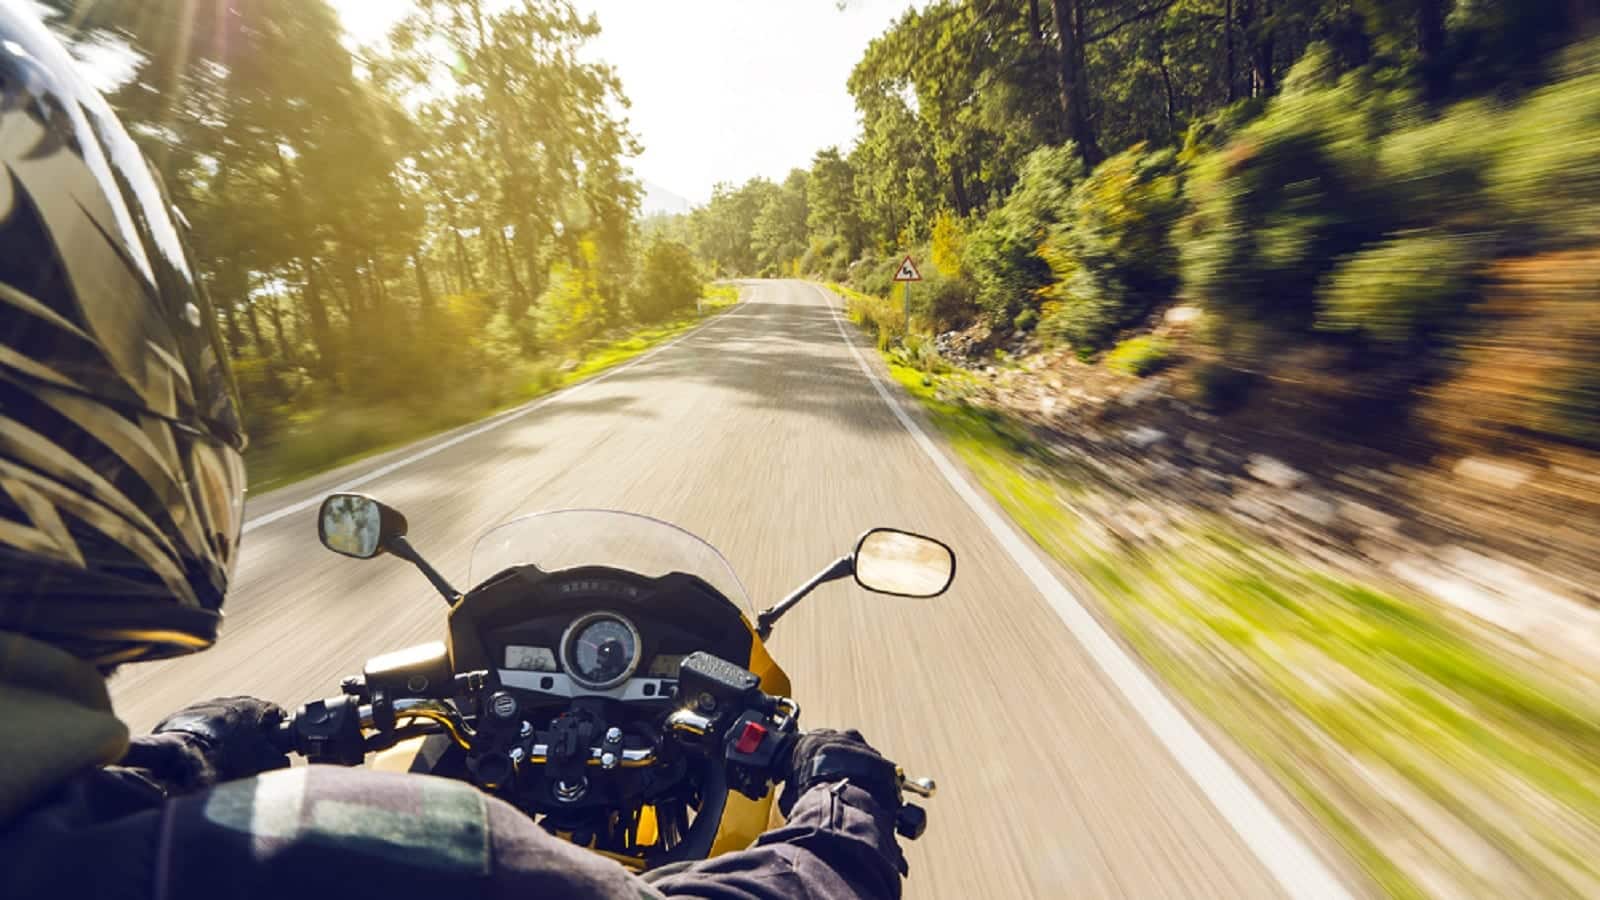 Motorcyclist Riding On A Rural Road Stock Photo